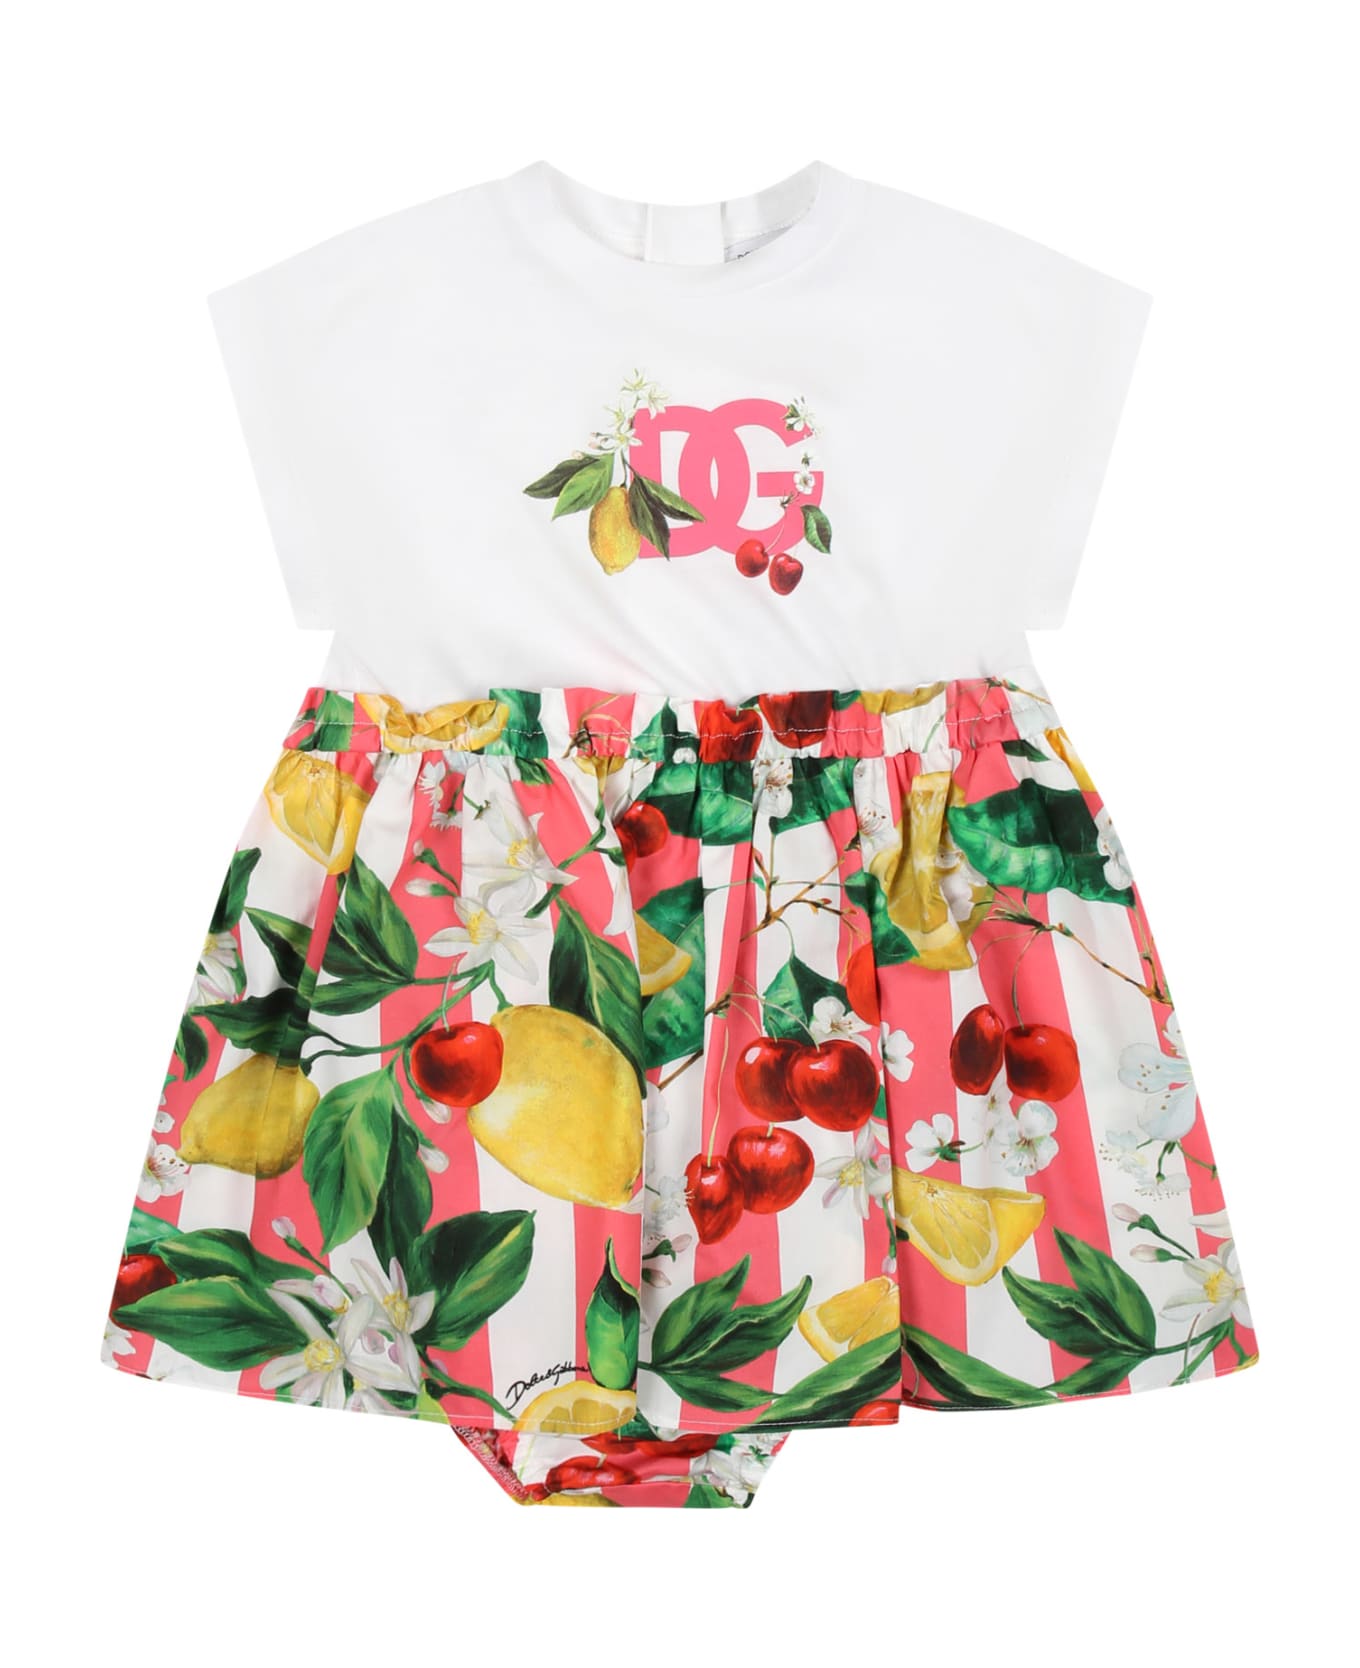 Dolce & Gabbana White Dress For Baby Girl With All-over Multicolor Fruits And Flowers - White